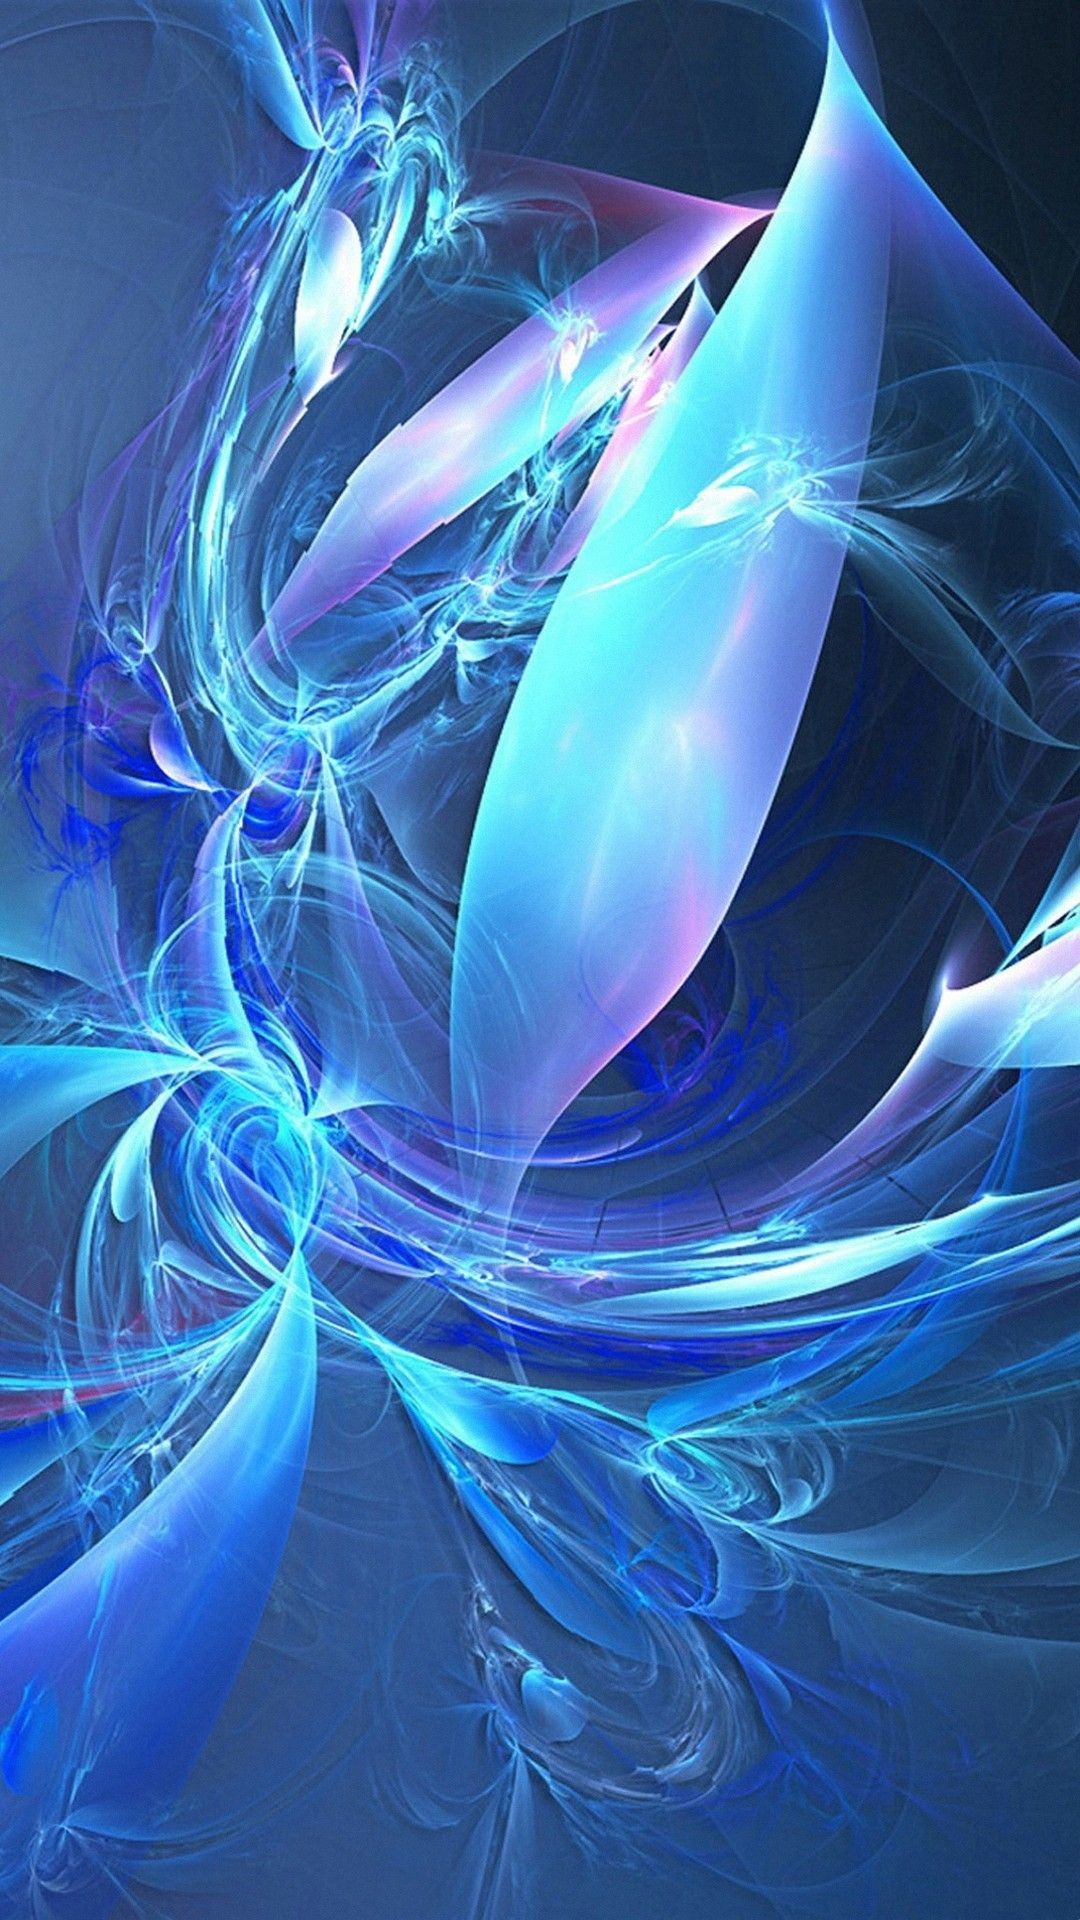 3d Animated Wallpaper Android : Android 3d Wallpaper Animated